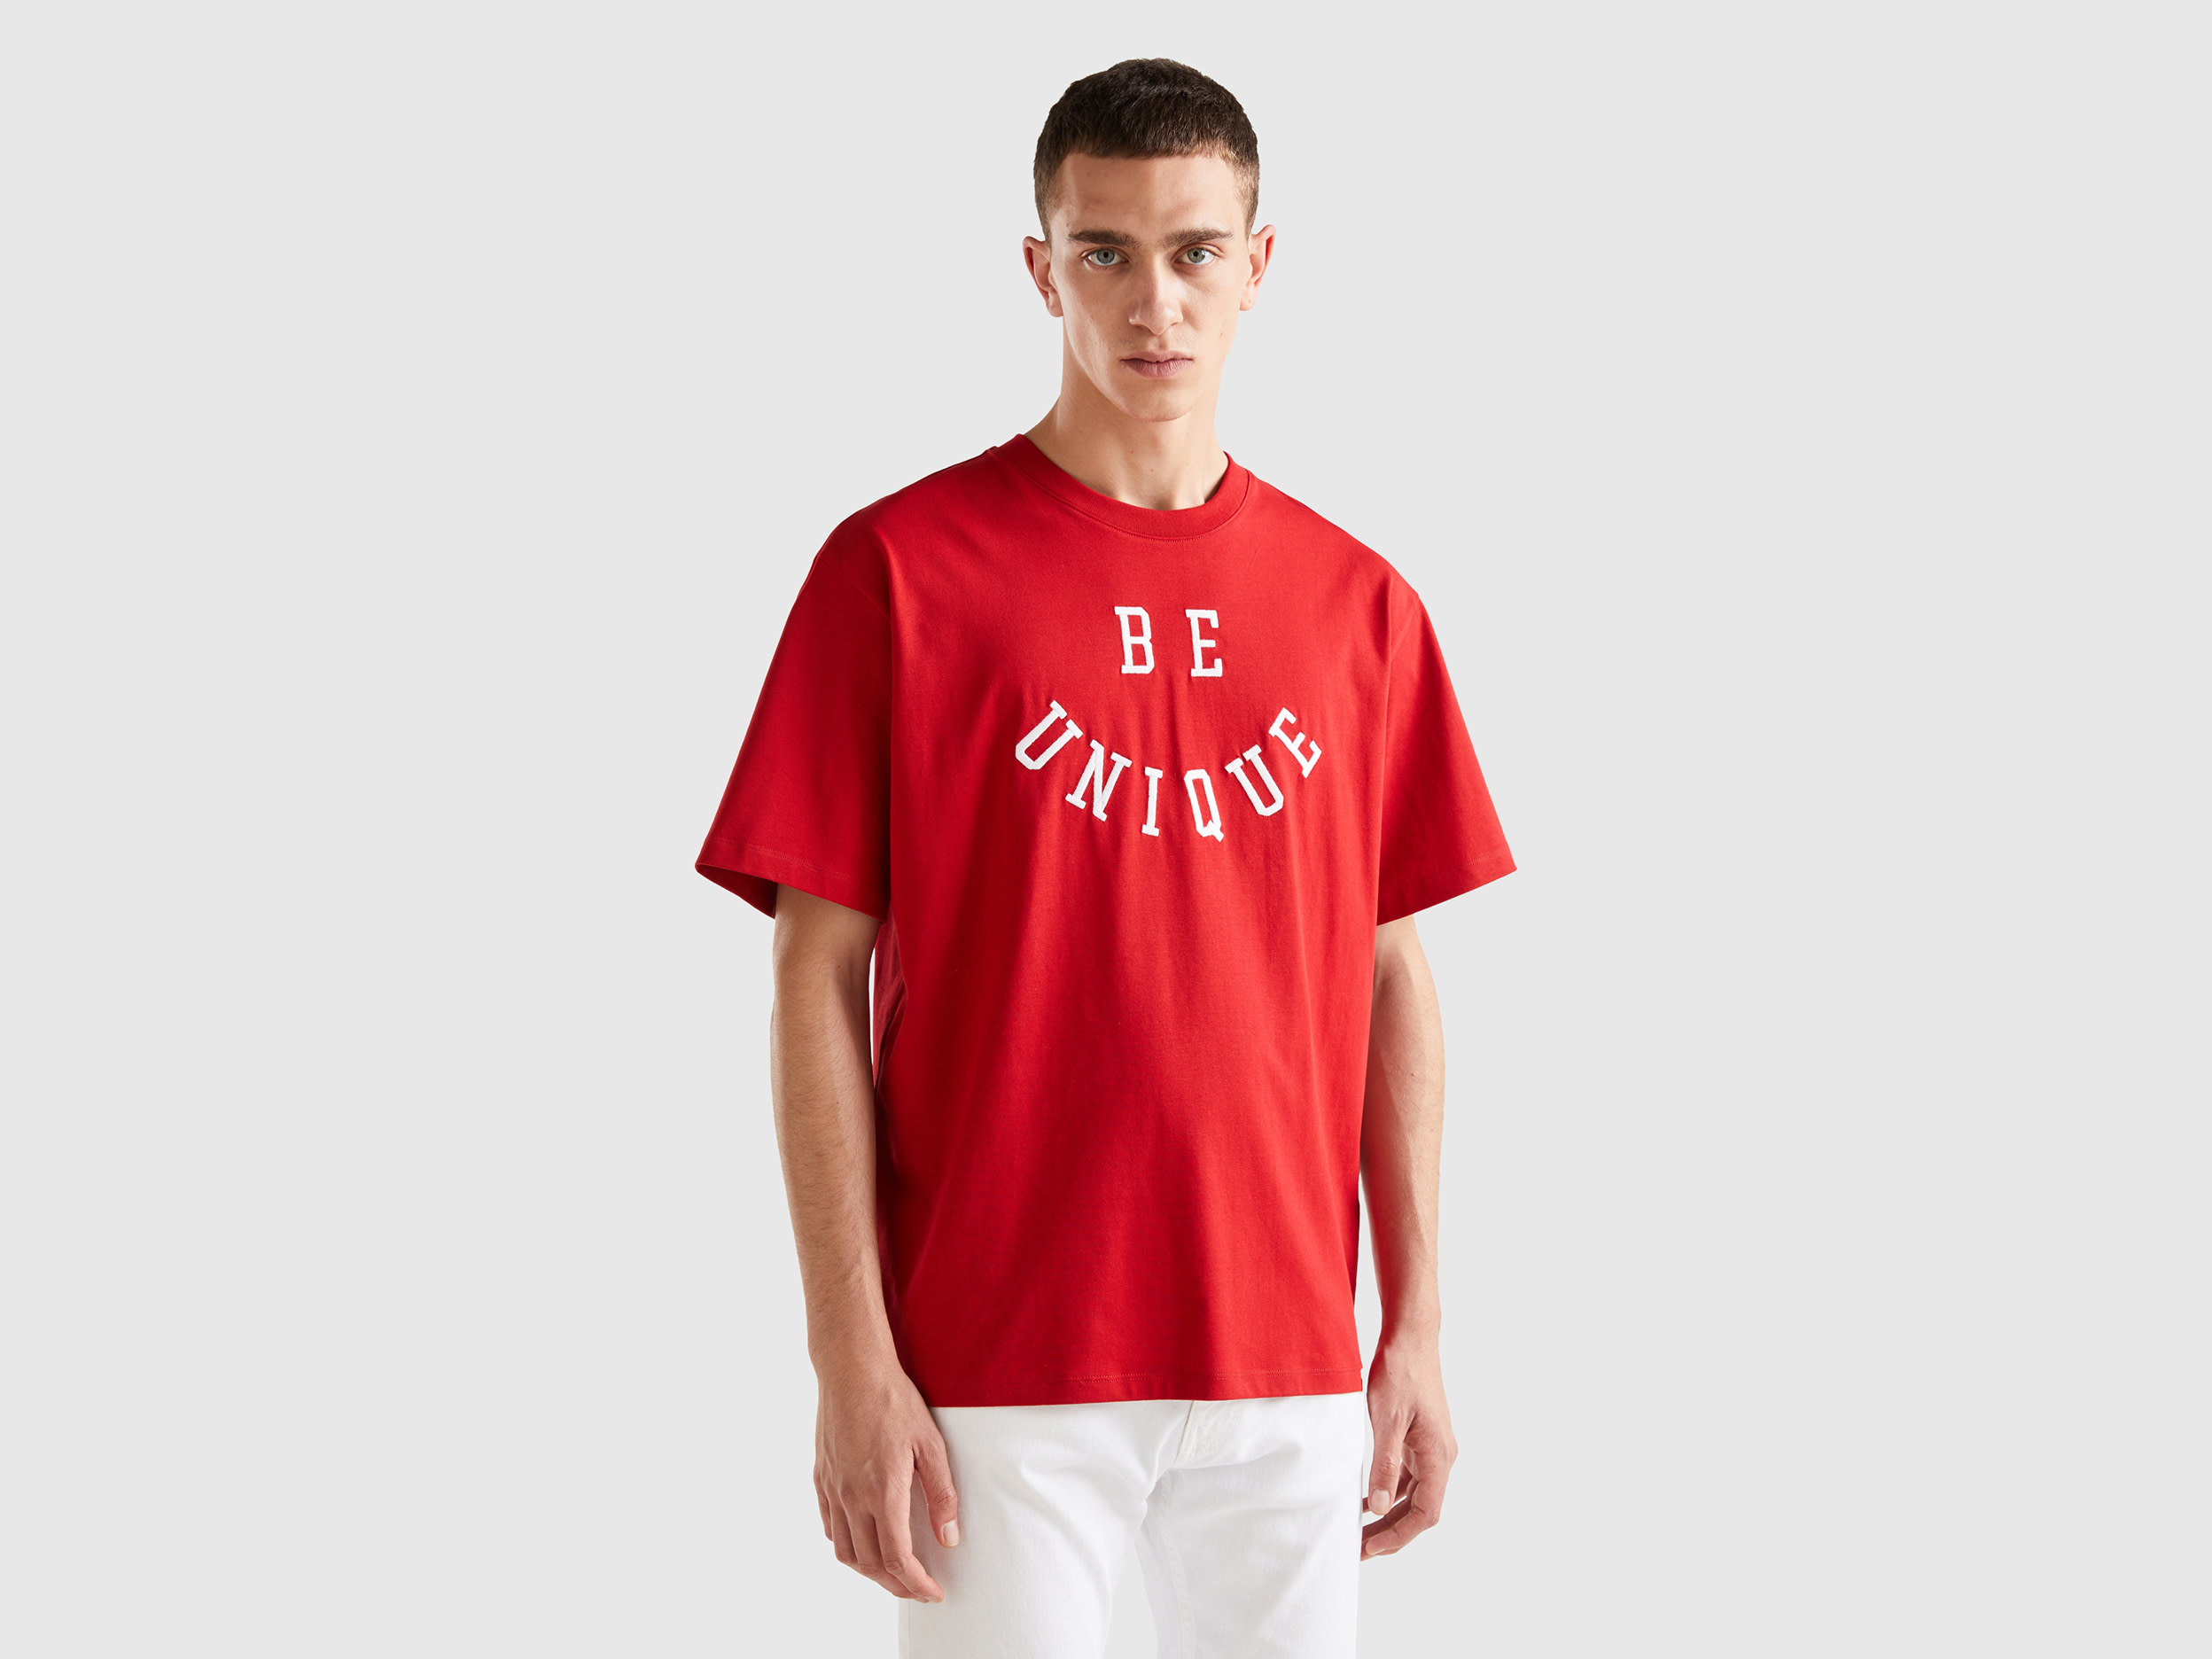 Benetton, T-shirt With Slogan Print, size XS, Red, Men